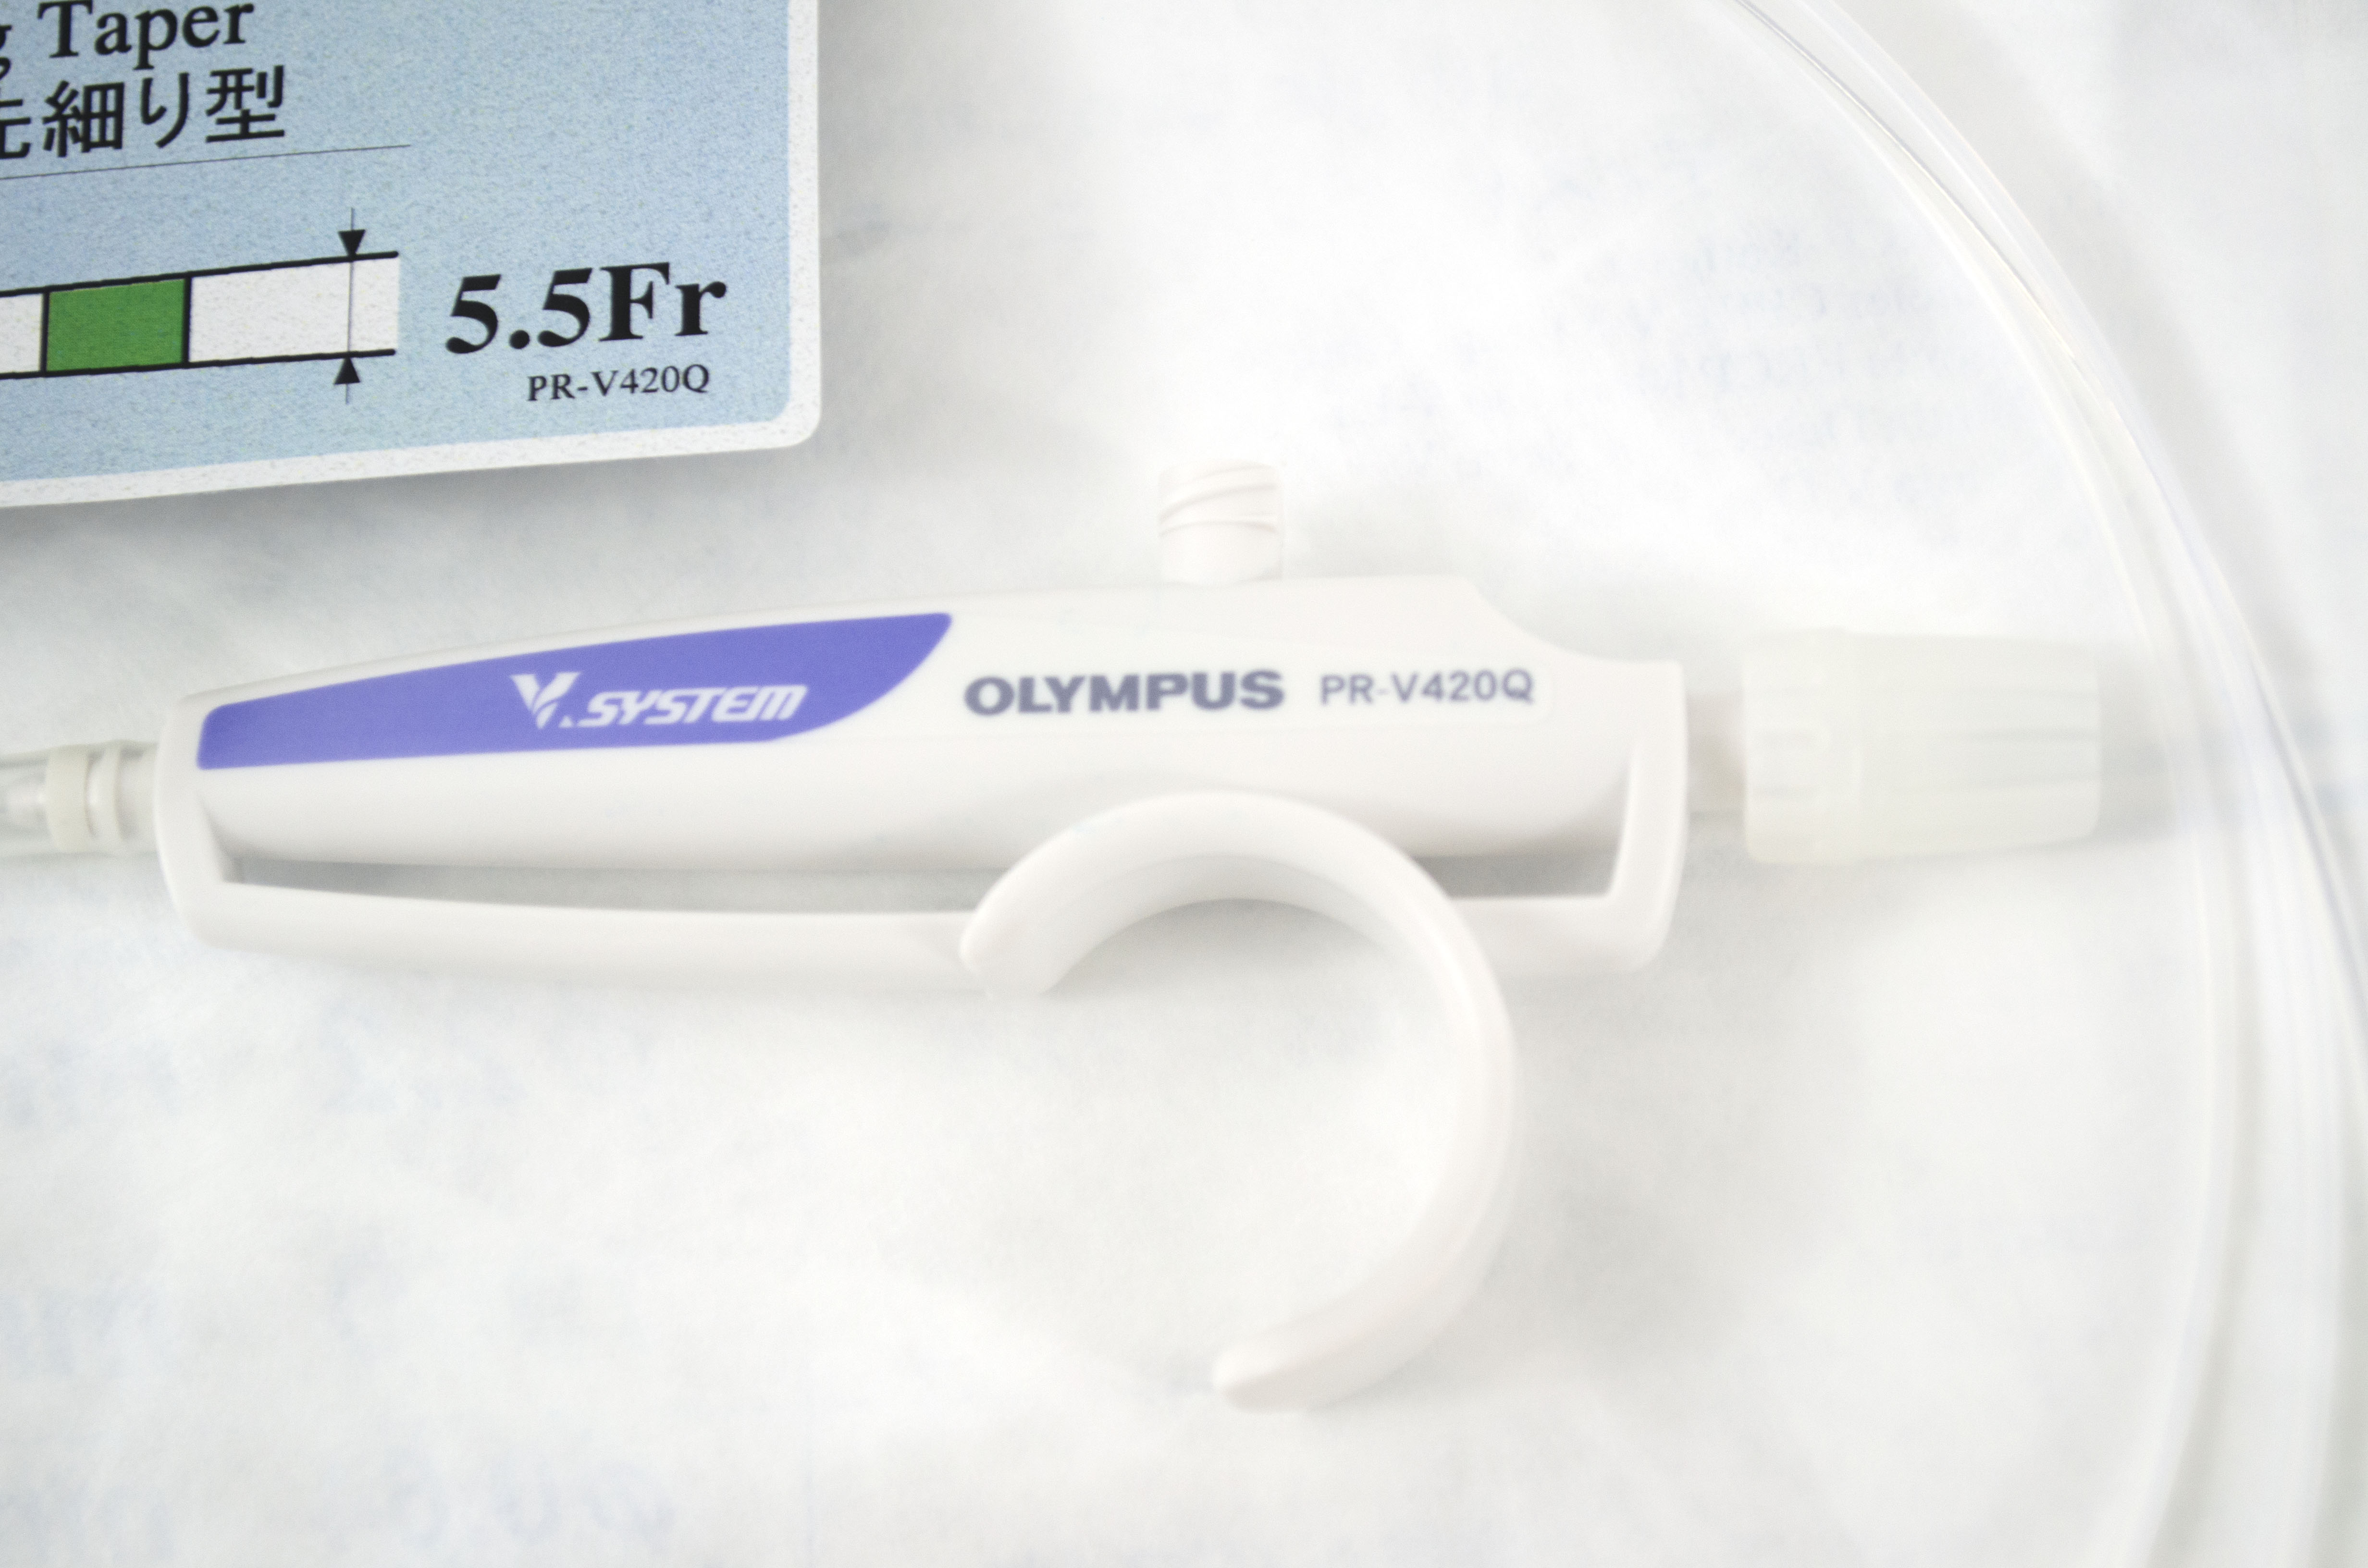 [Out-of-Date] Olympus Disposable Cannula - PR-V420Q